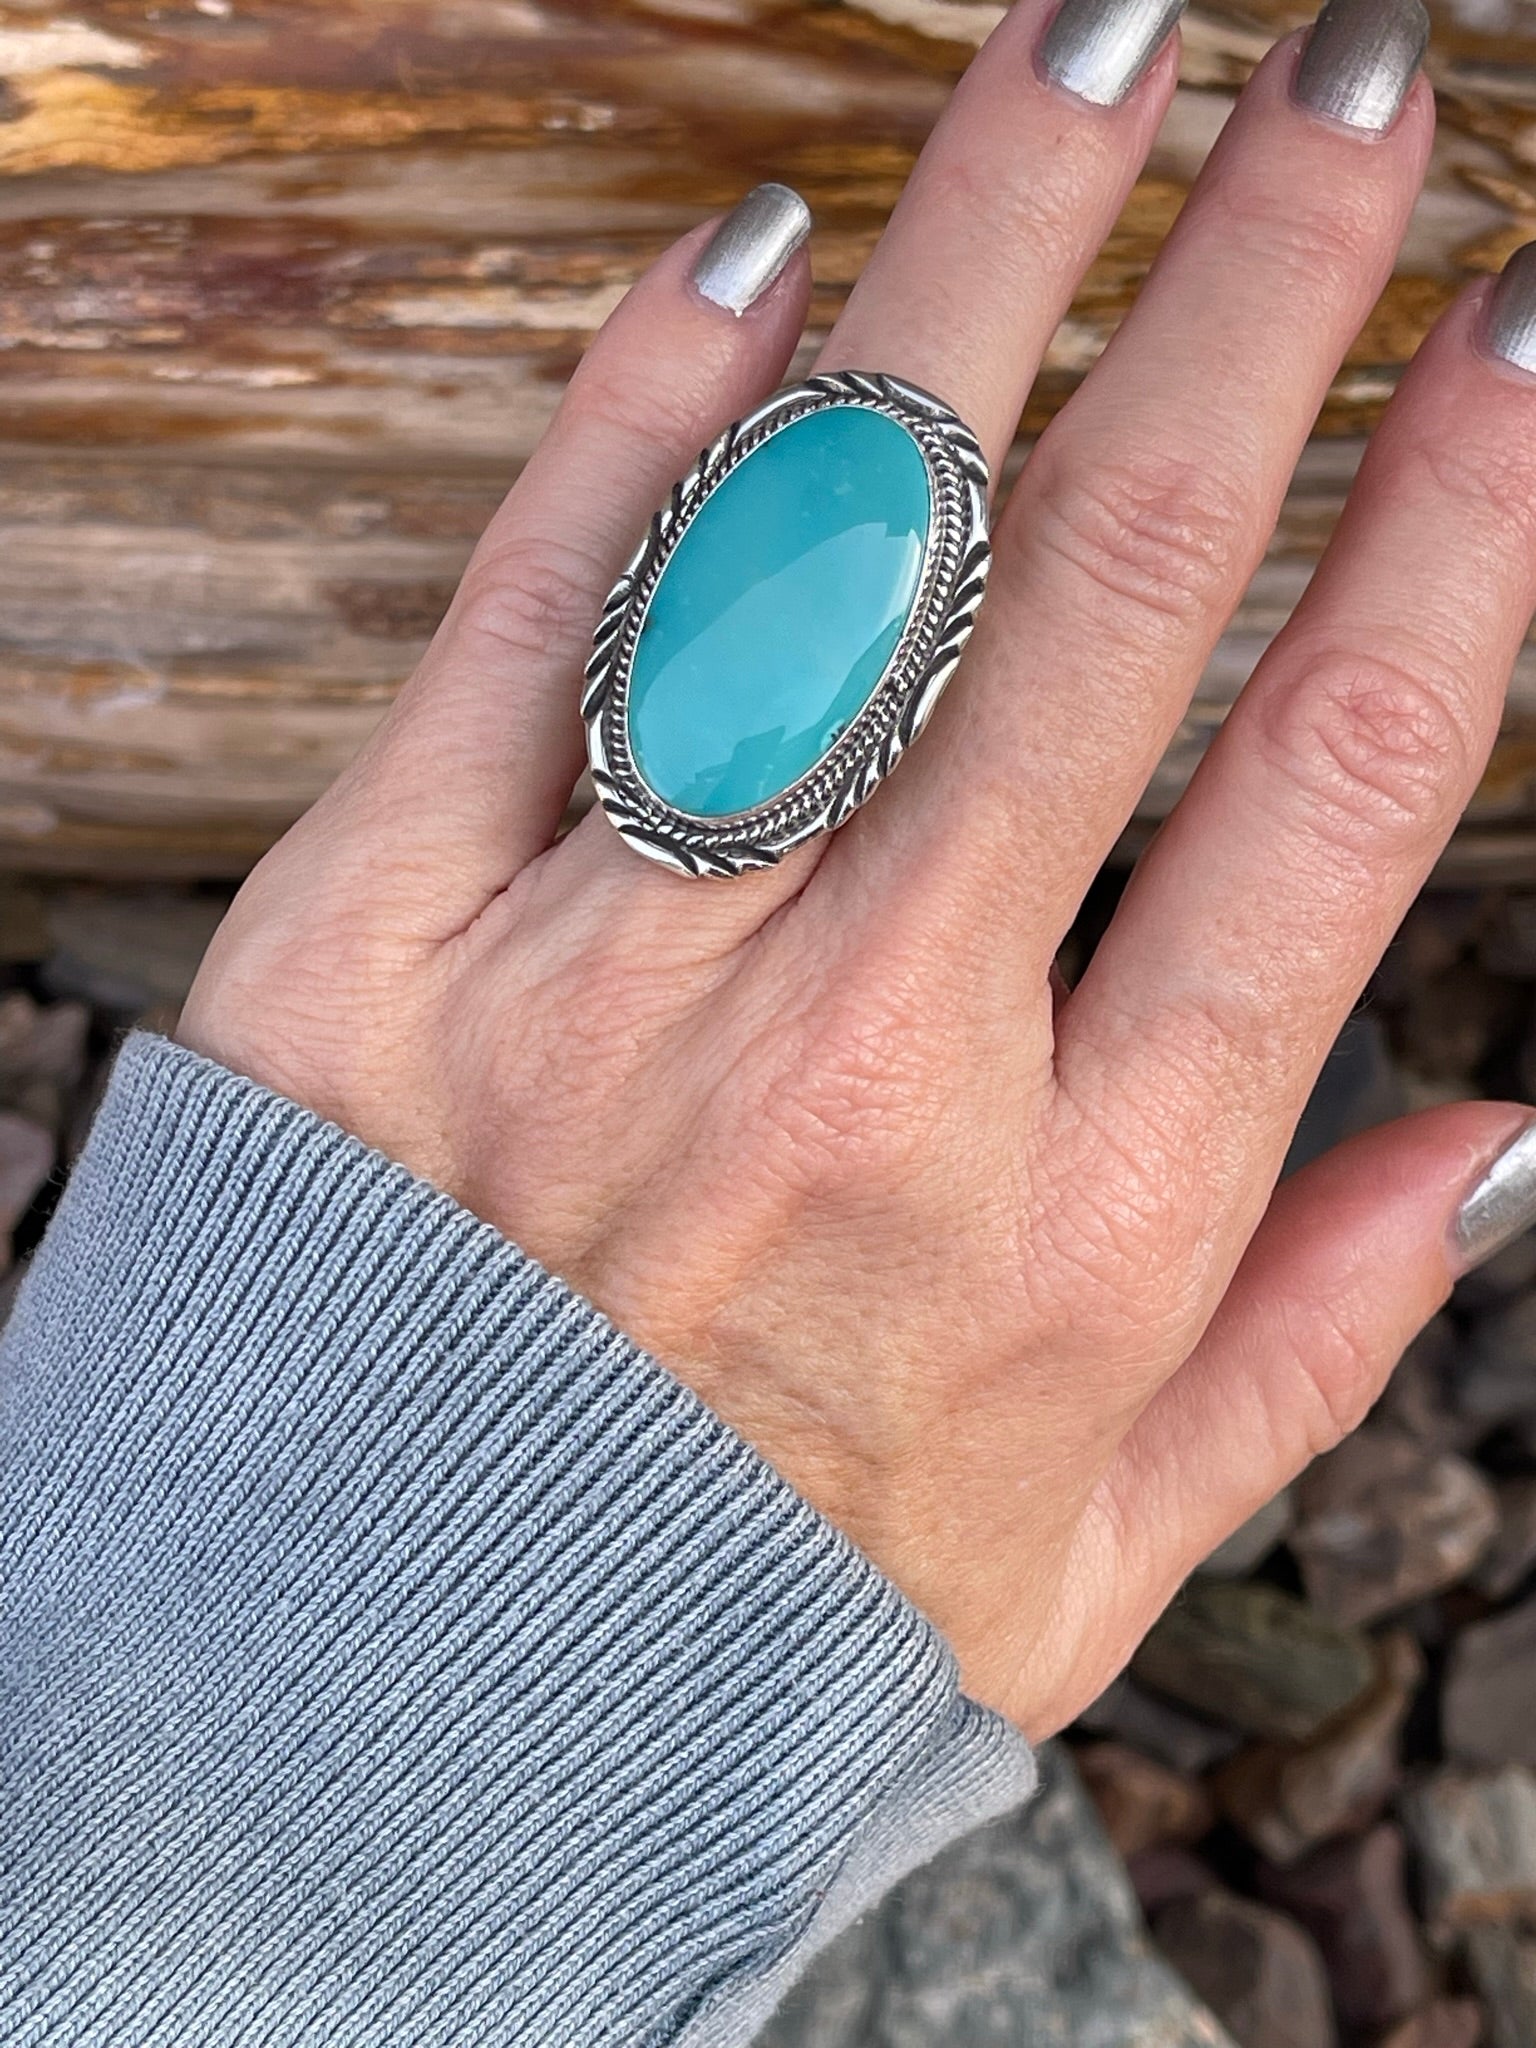 Handmade Sterling Silver Kingman Turquoise Ring with Five Prong Ring Shank- Size 5 1/2